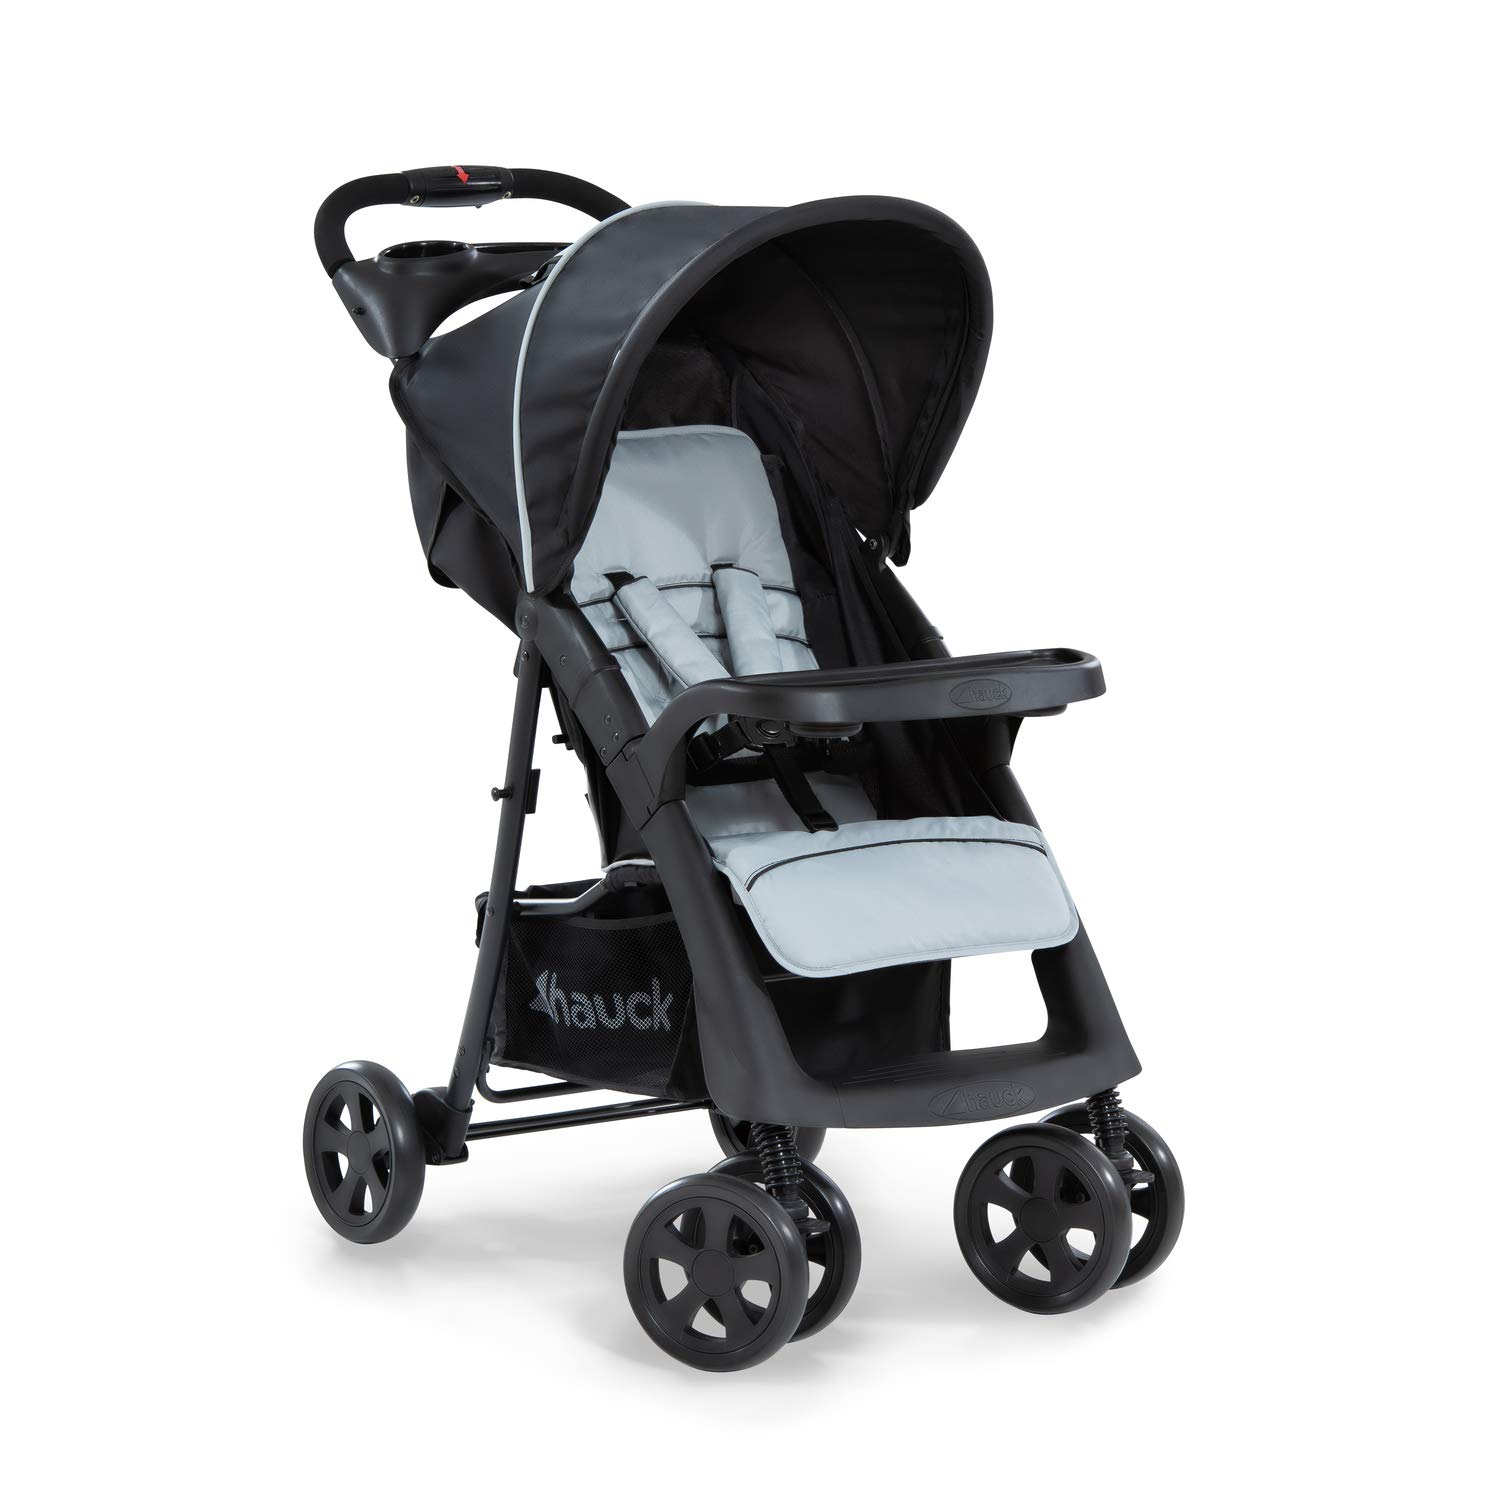 Hauck Buggy Shopper Neo II / with reclining function, small foldable / for children from birth up to 15 kg, Caviar Silver (Silver)